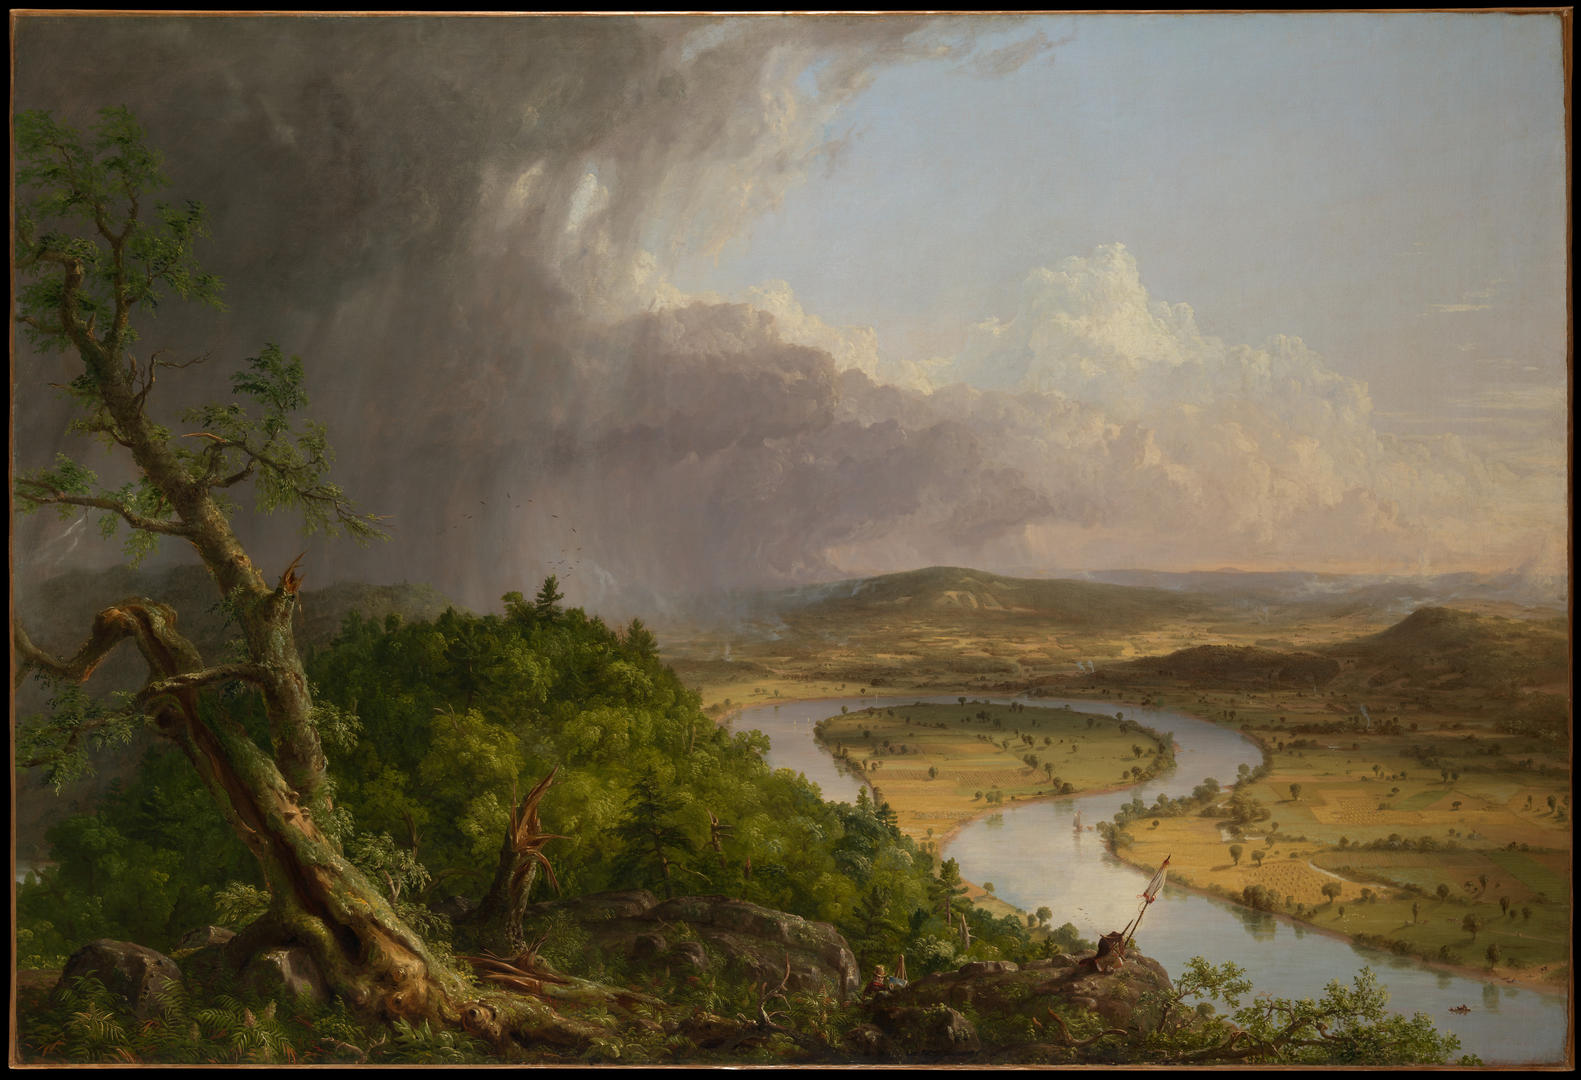 “View from Mount Holyoke, Northampton, Massachusetts, after a Thunderstorm—The Oxbow” (1836), Thomas Cole